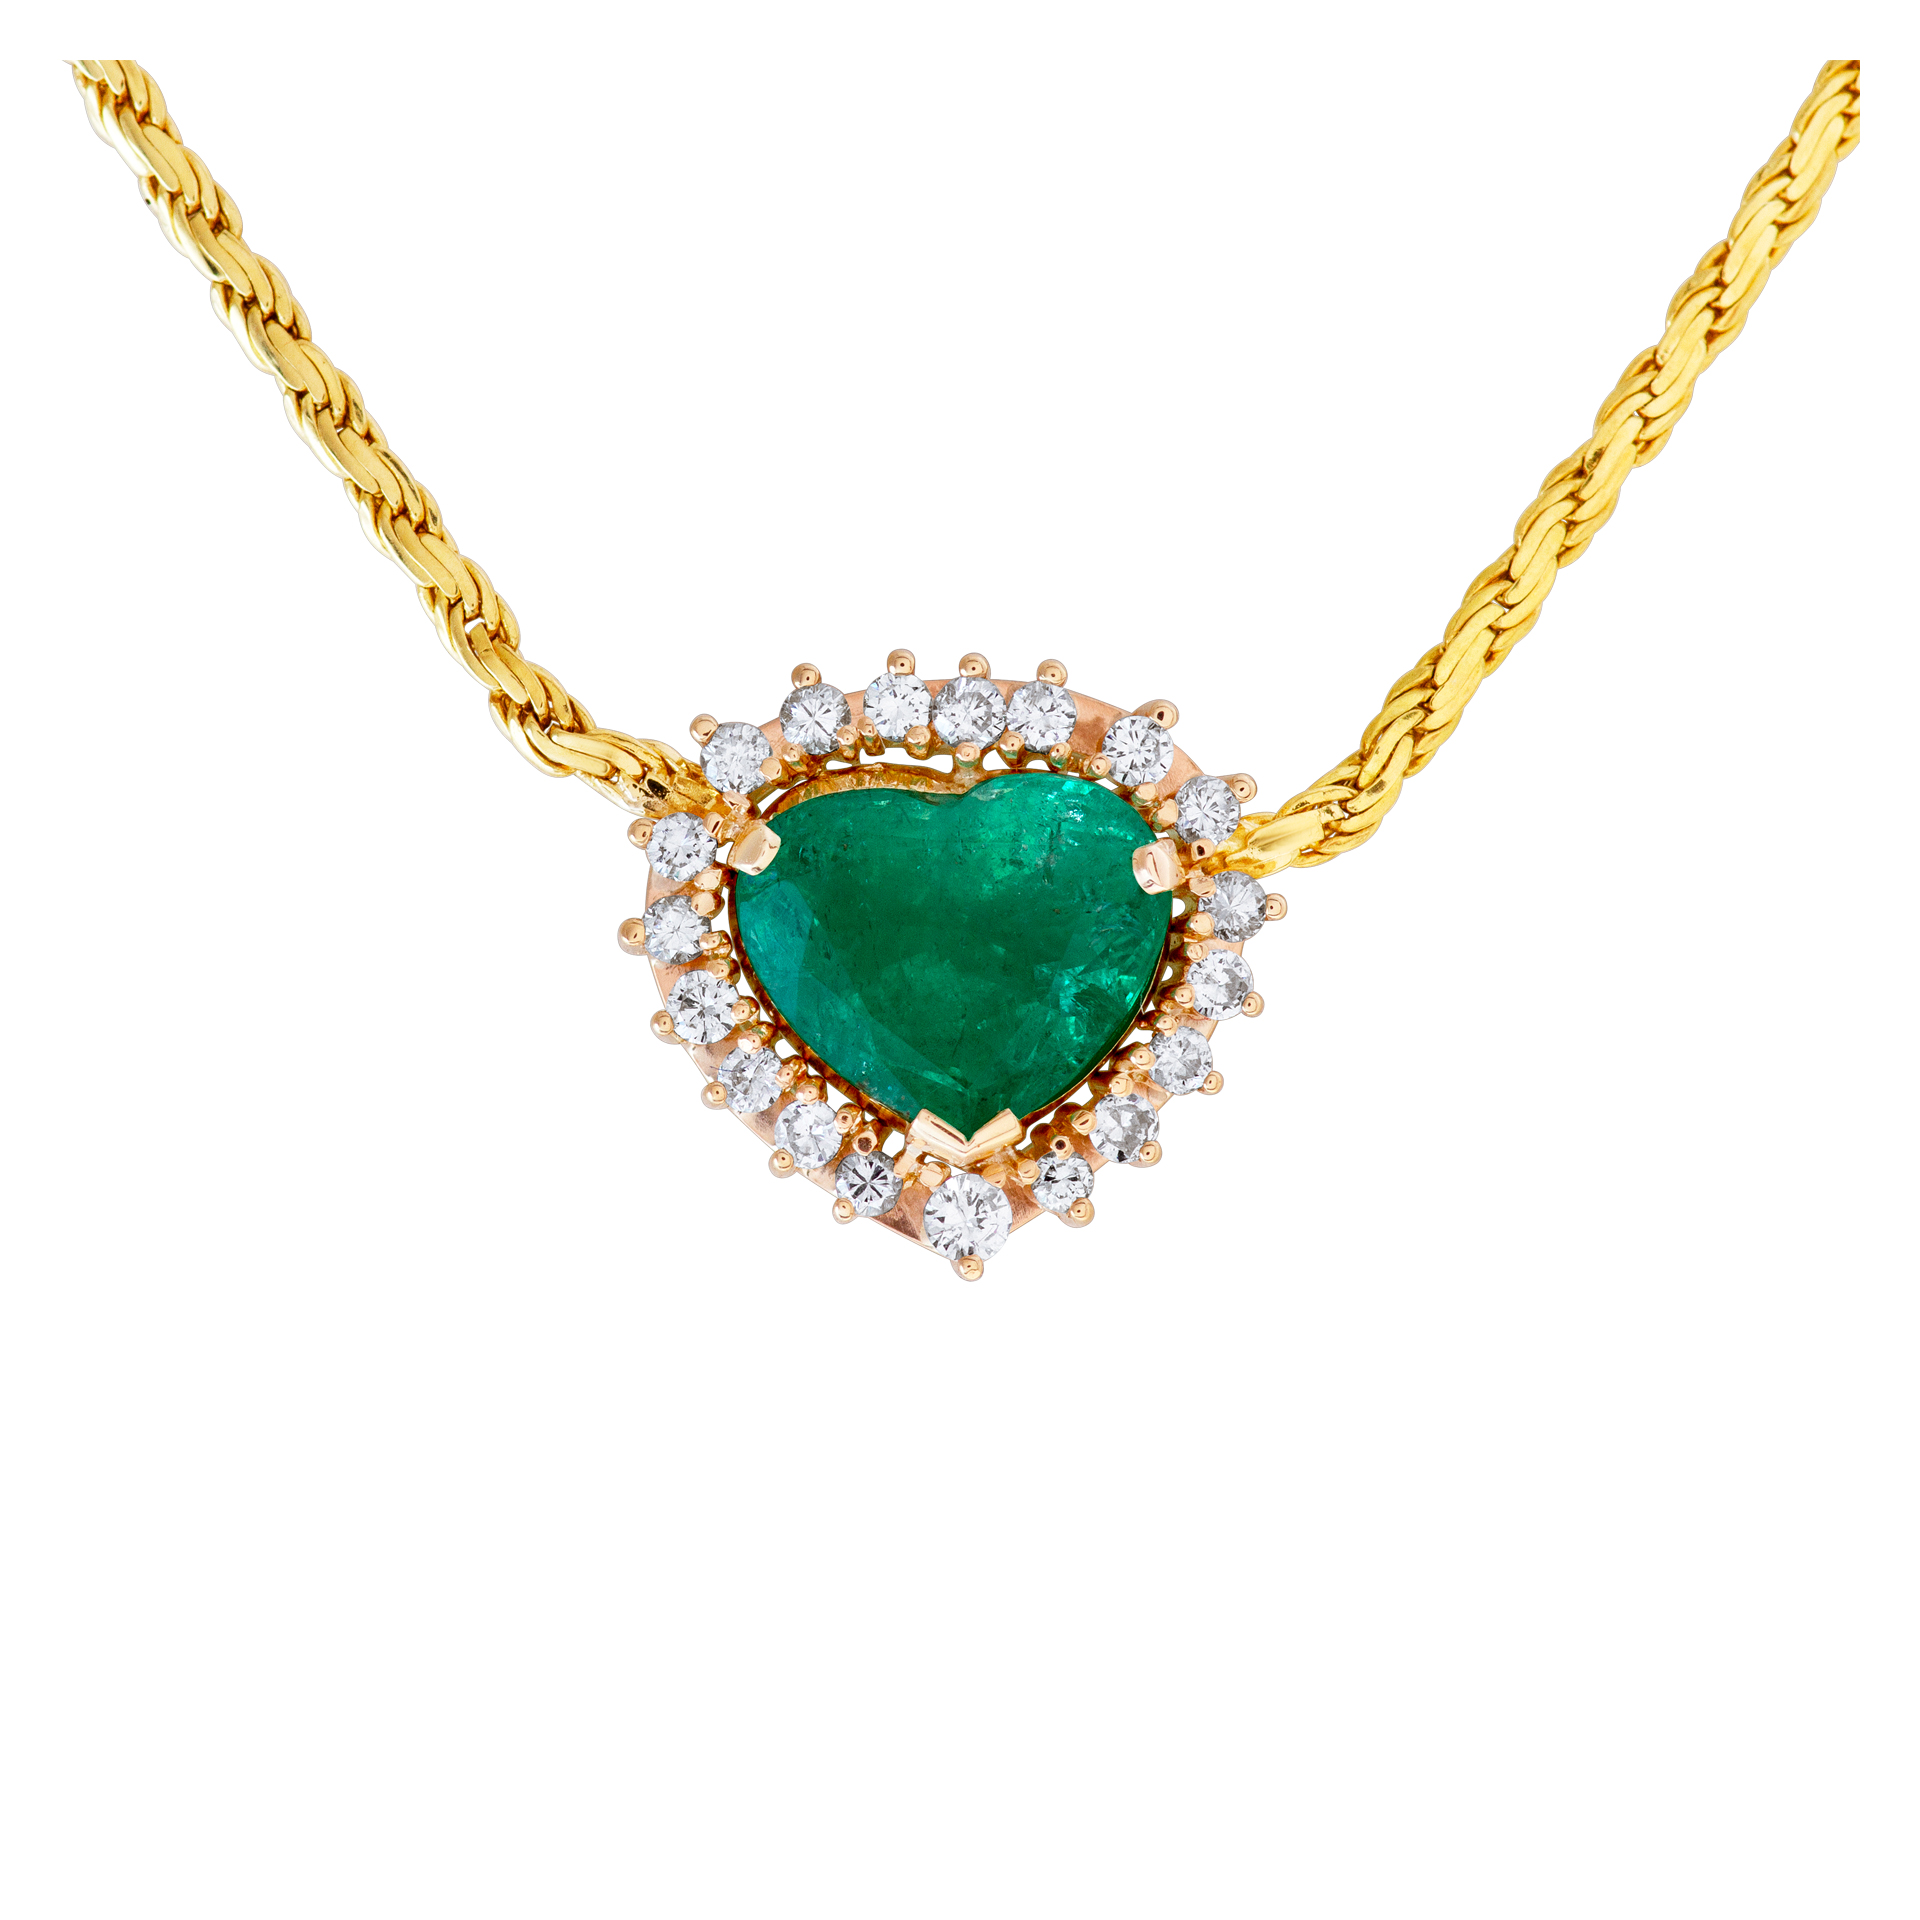 Heart shape 3.01 carat Colombian emerald and diamond necklace image 1